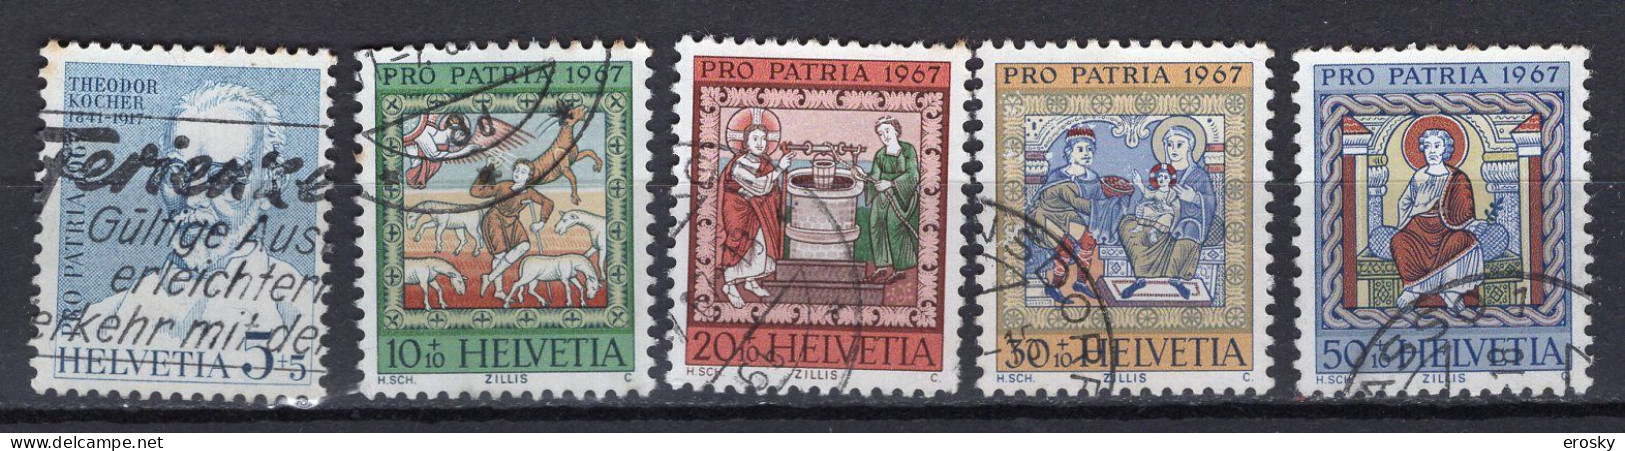 T3159 - SUISSE SWITZERLAND Yv N°786/90 Pro Patria Fete Nationale - Used Stamps